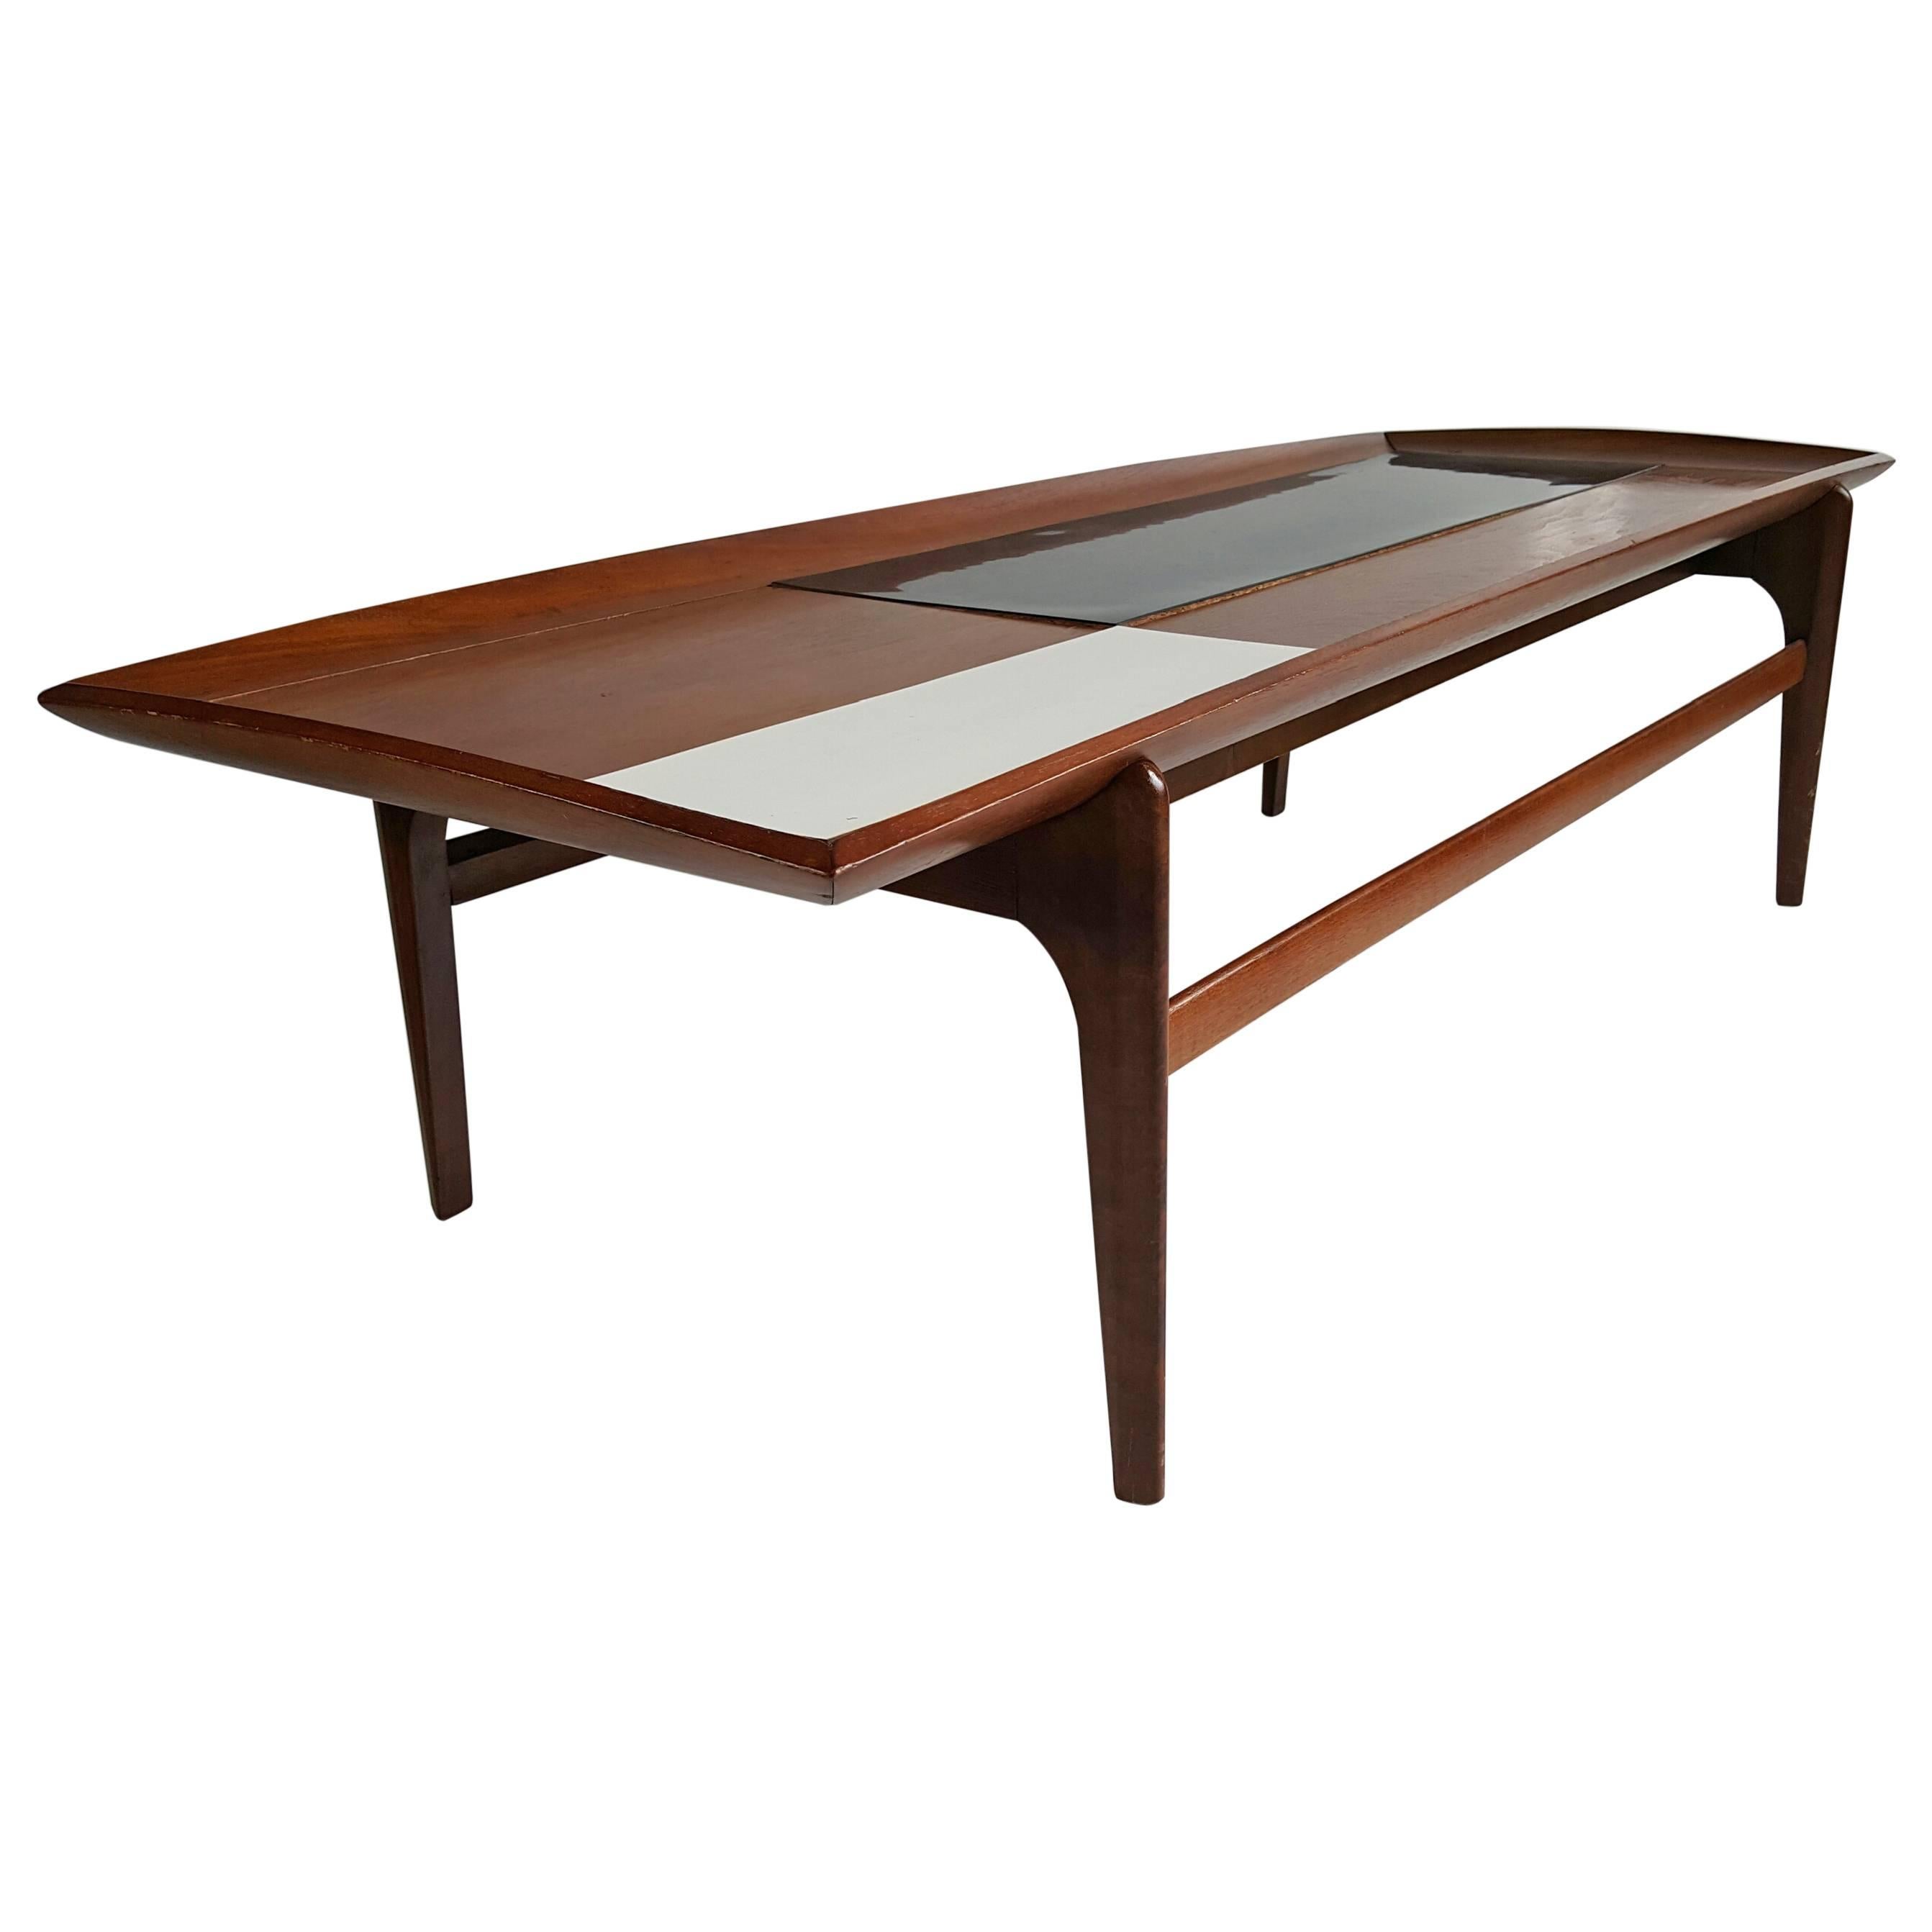 Stunning Modernist Coffee Table, Walnut, Black and White Laminate Top